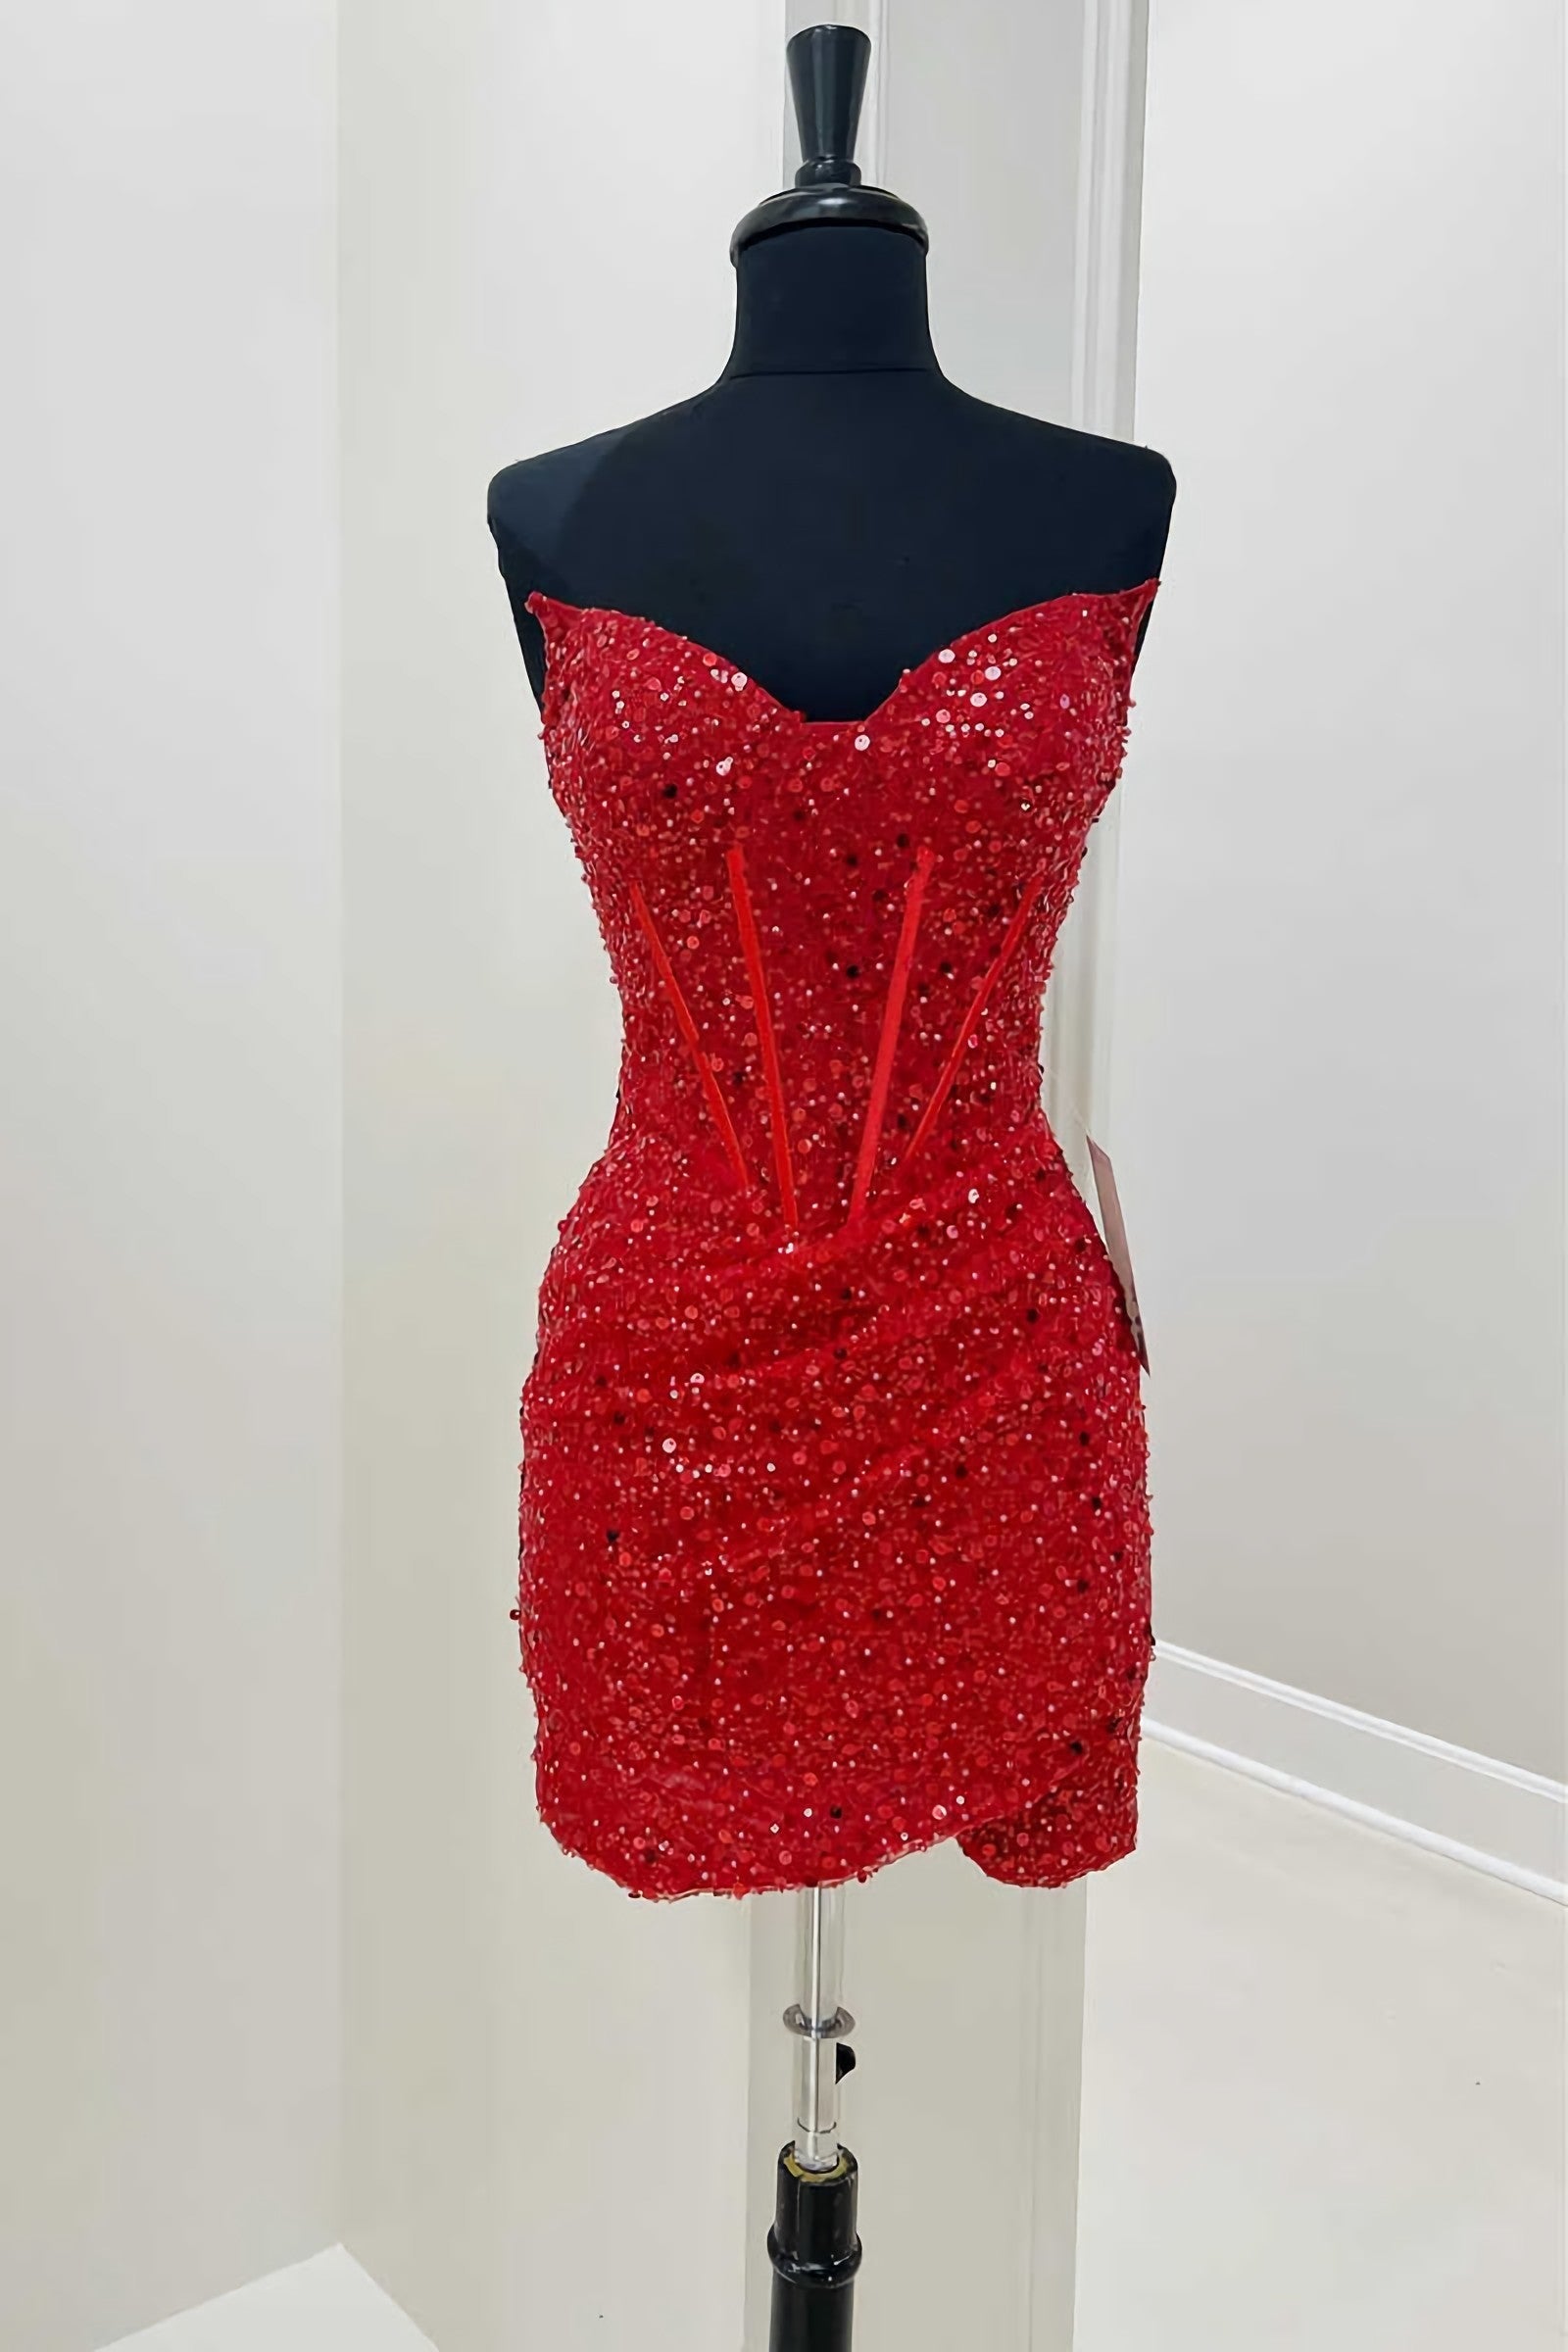 Party Dress Europe, Red Sequined Sheath Mini Homecoming Dress Club Dresses